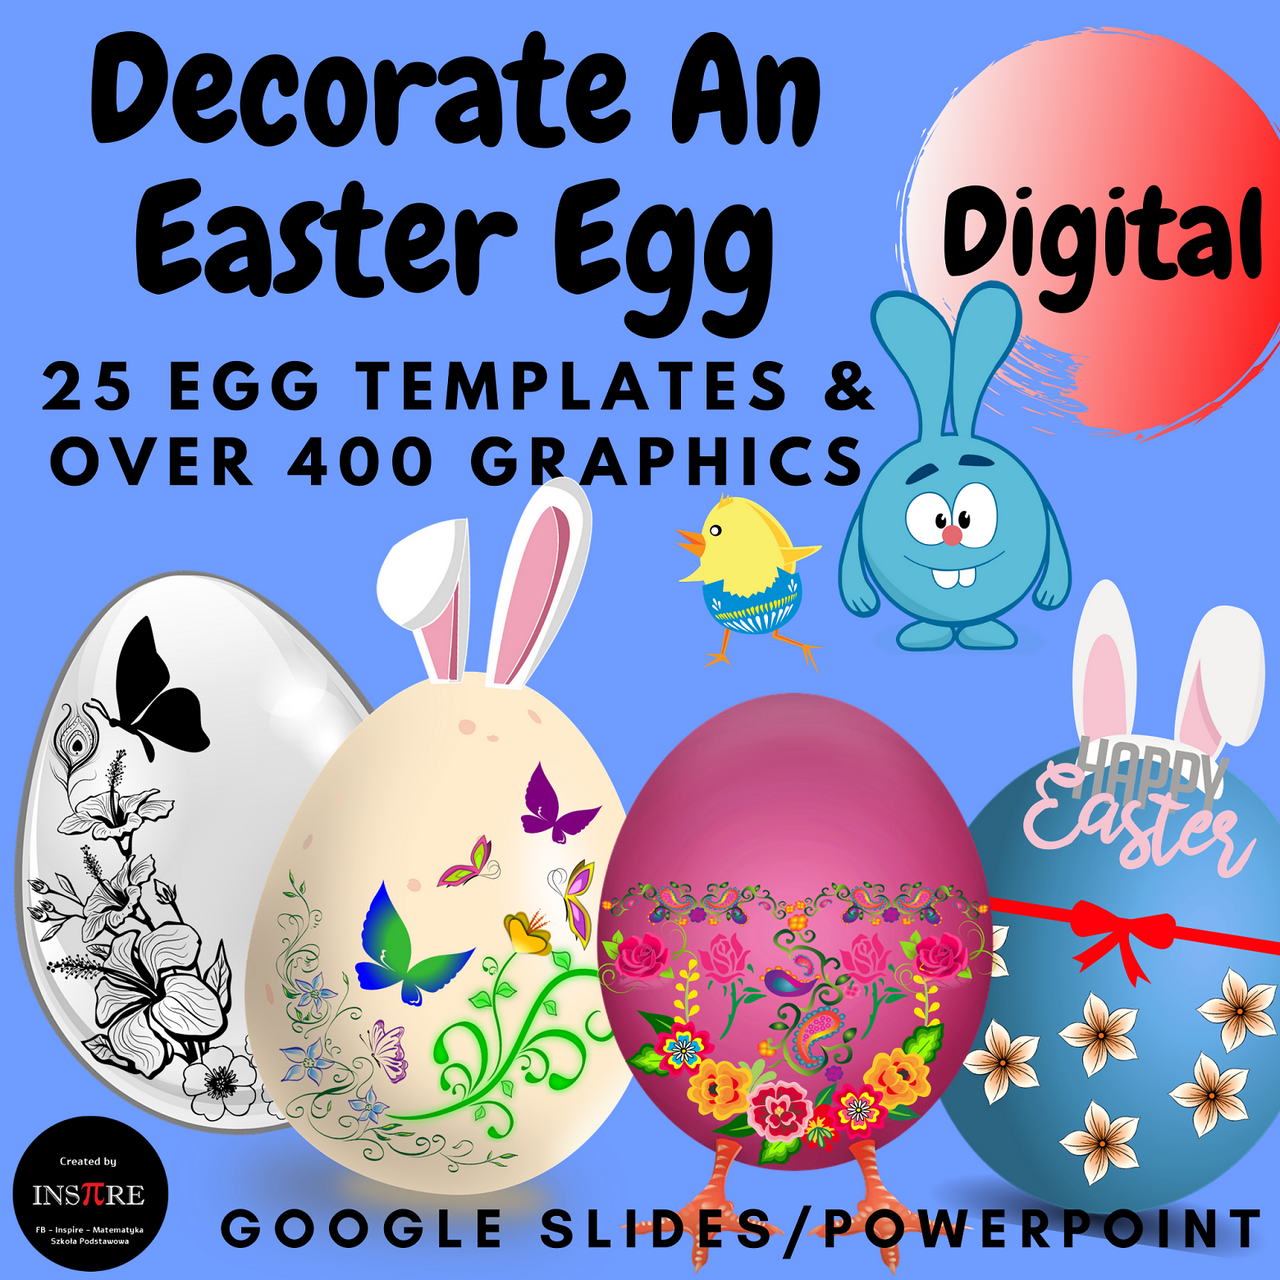 Spring Activities | Virtually Decorate An Easter Egg | DIGITAL Craft in Google